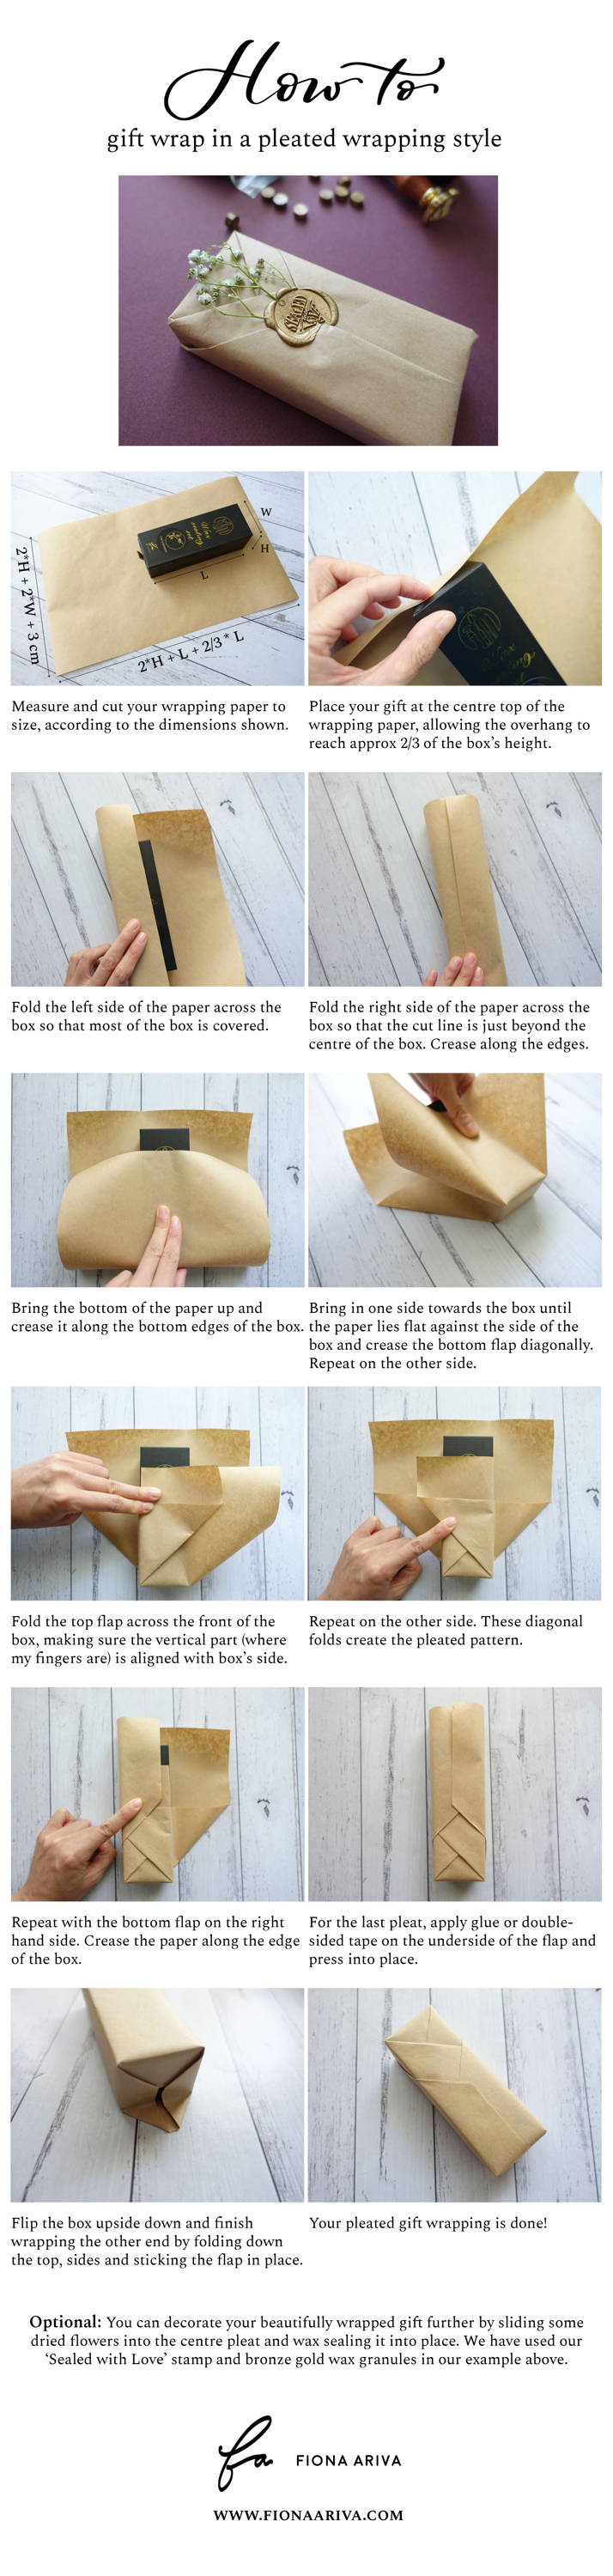 How to Fold a Wrap: 4 Quick & Easy Techniques